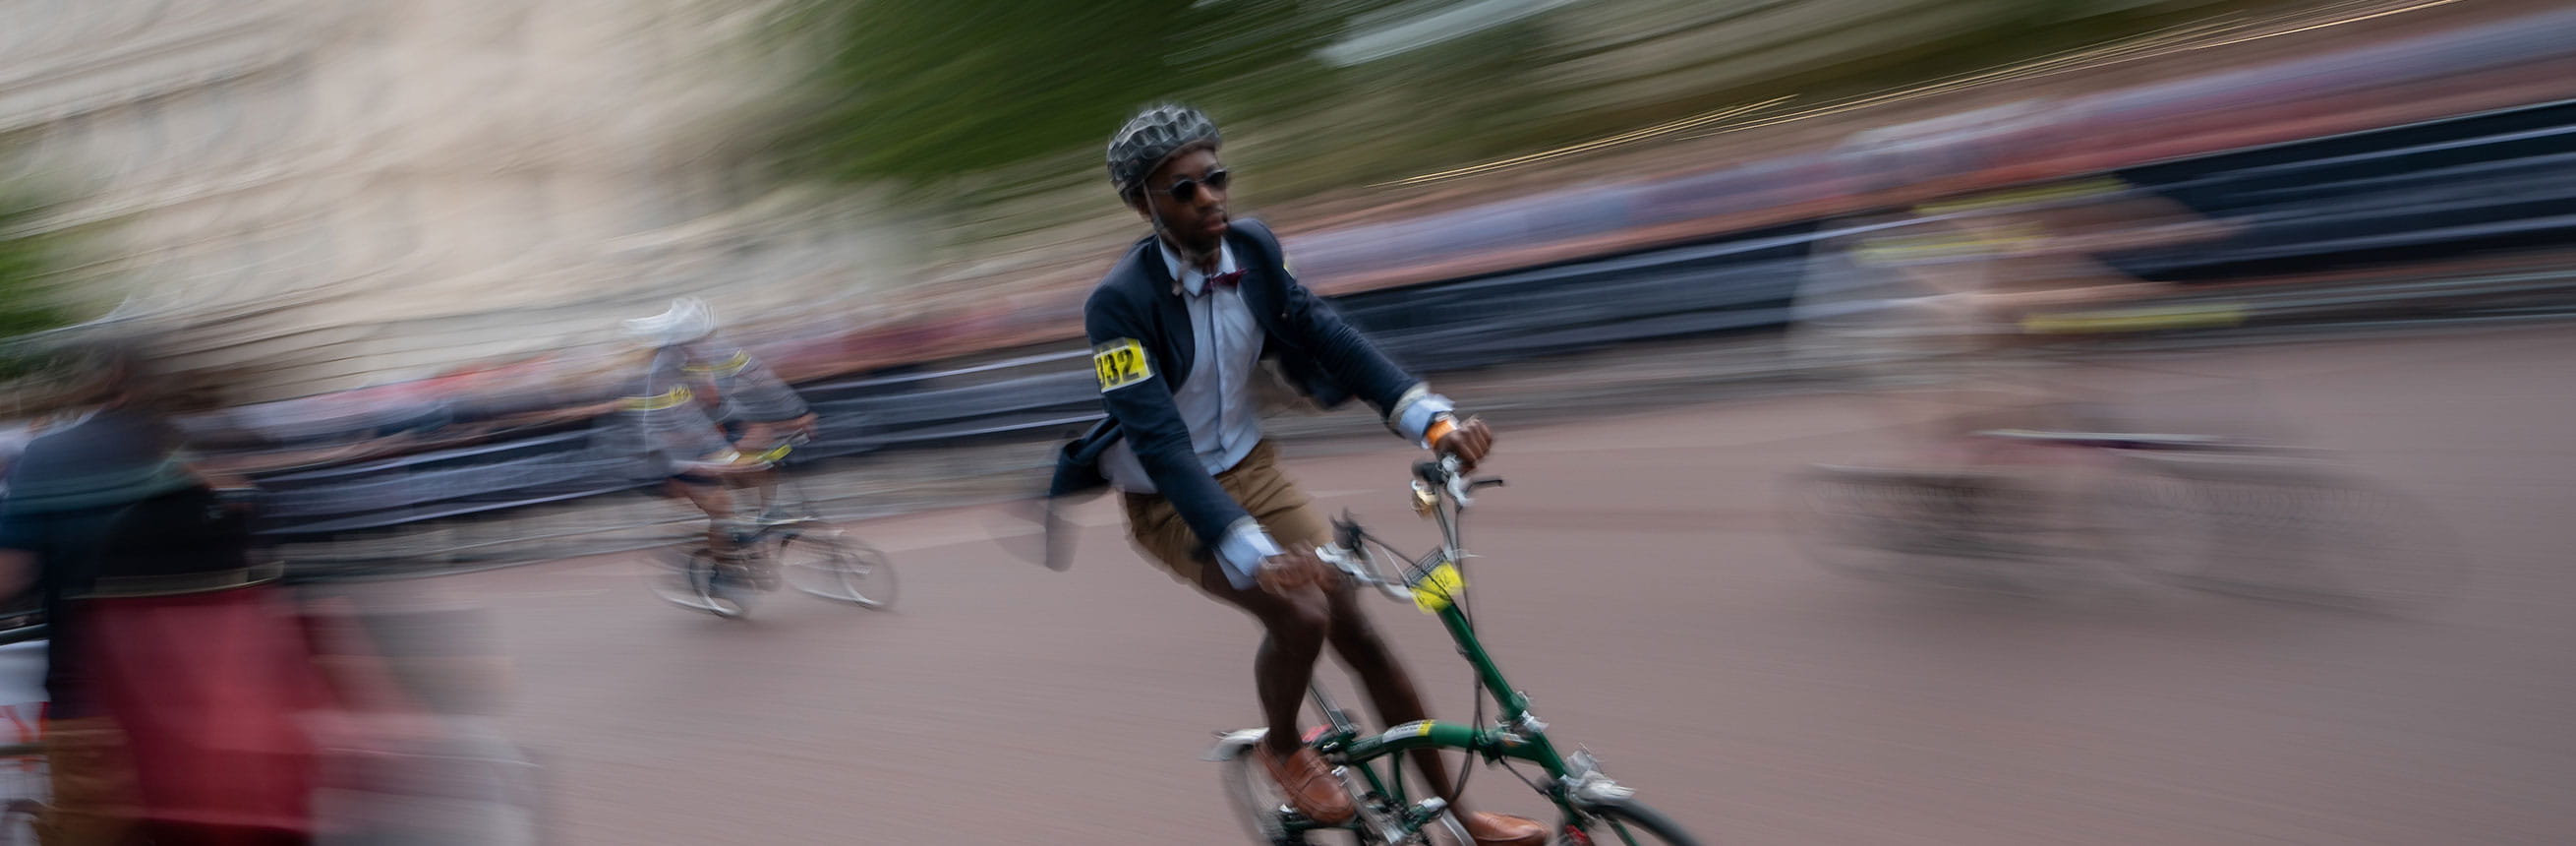 Competitors riding in The Brompton World Championship. Saturday 3rd August 2019